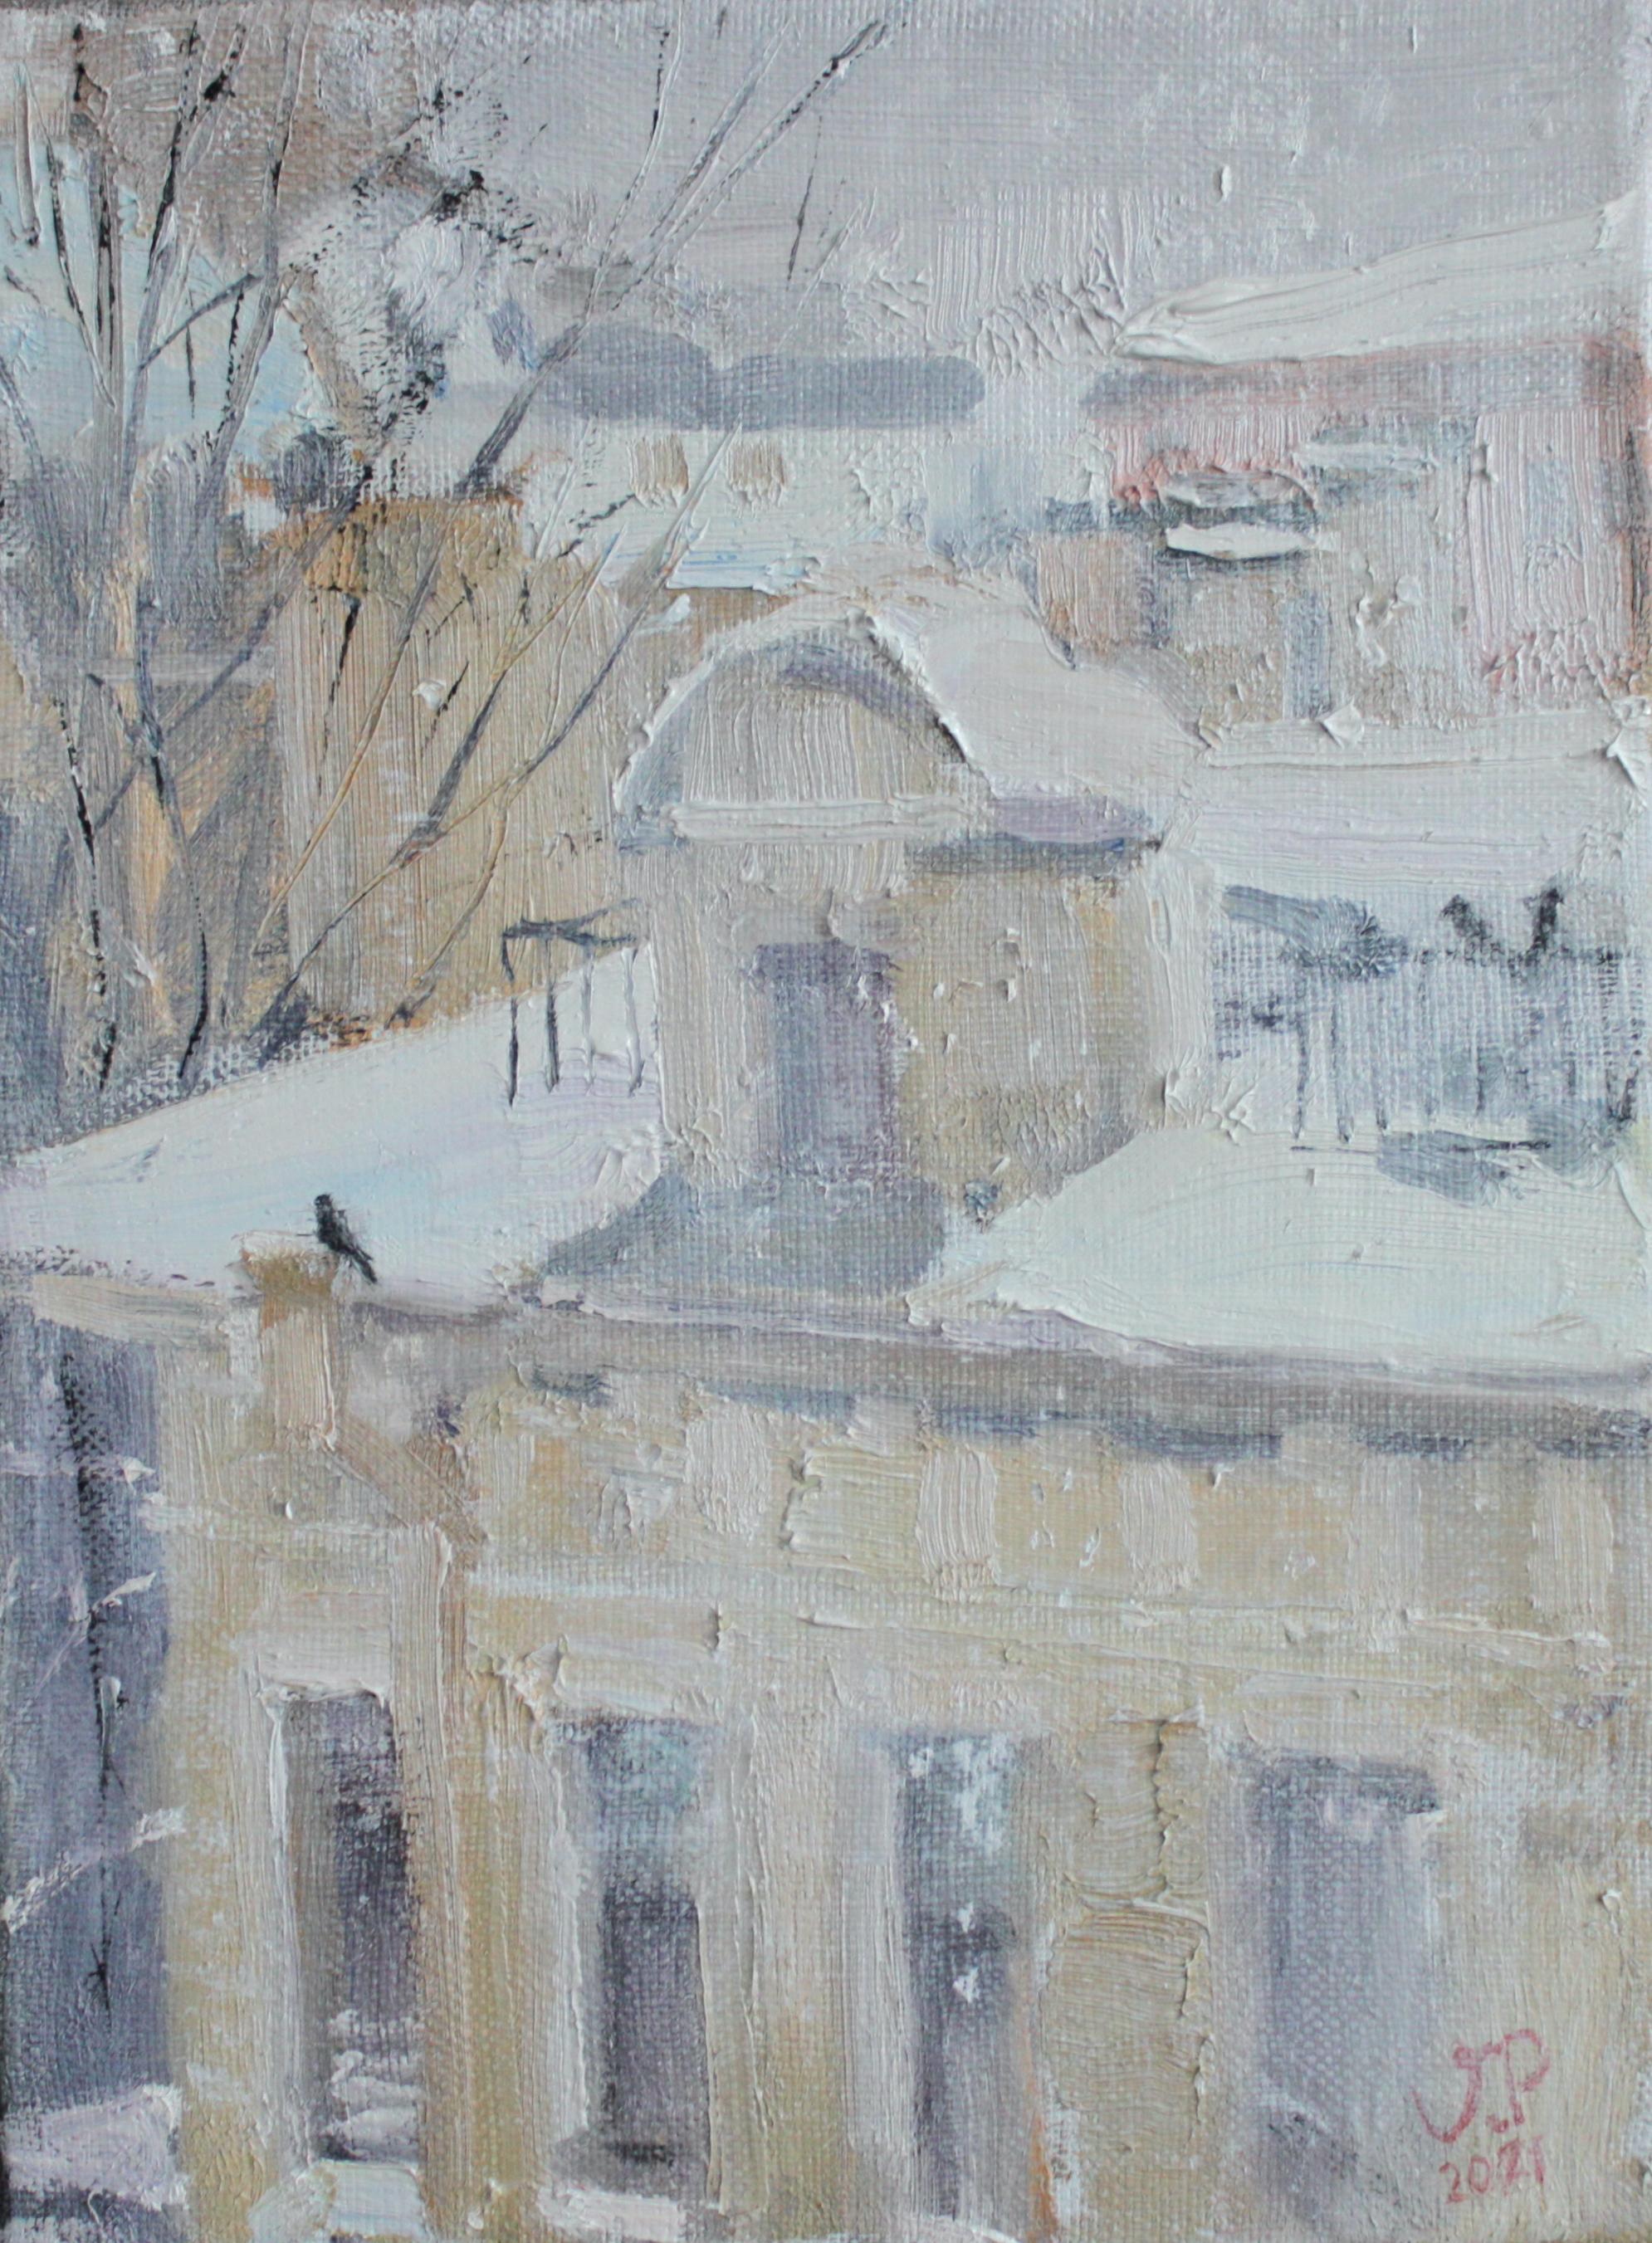 This soft powdery white landscape by Valeria Privalikhina is one of her latest artworks painted in 2021. 

The artist shared about this intimate landscape: “This year, we had a snowy winter in St. Petersburg, and I enjoyed a real snowfall from the